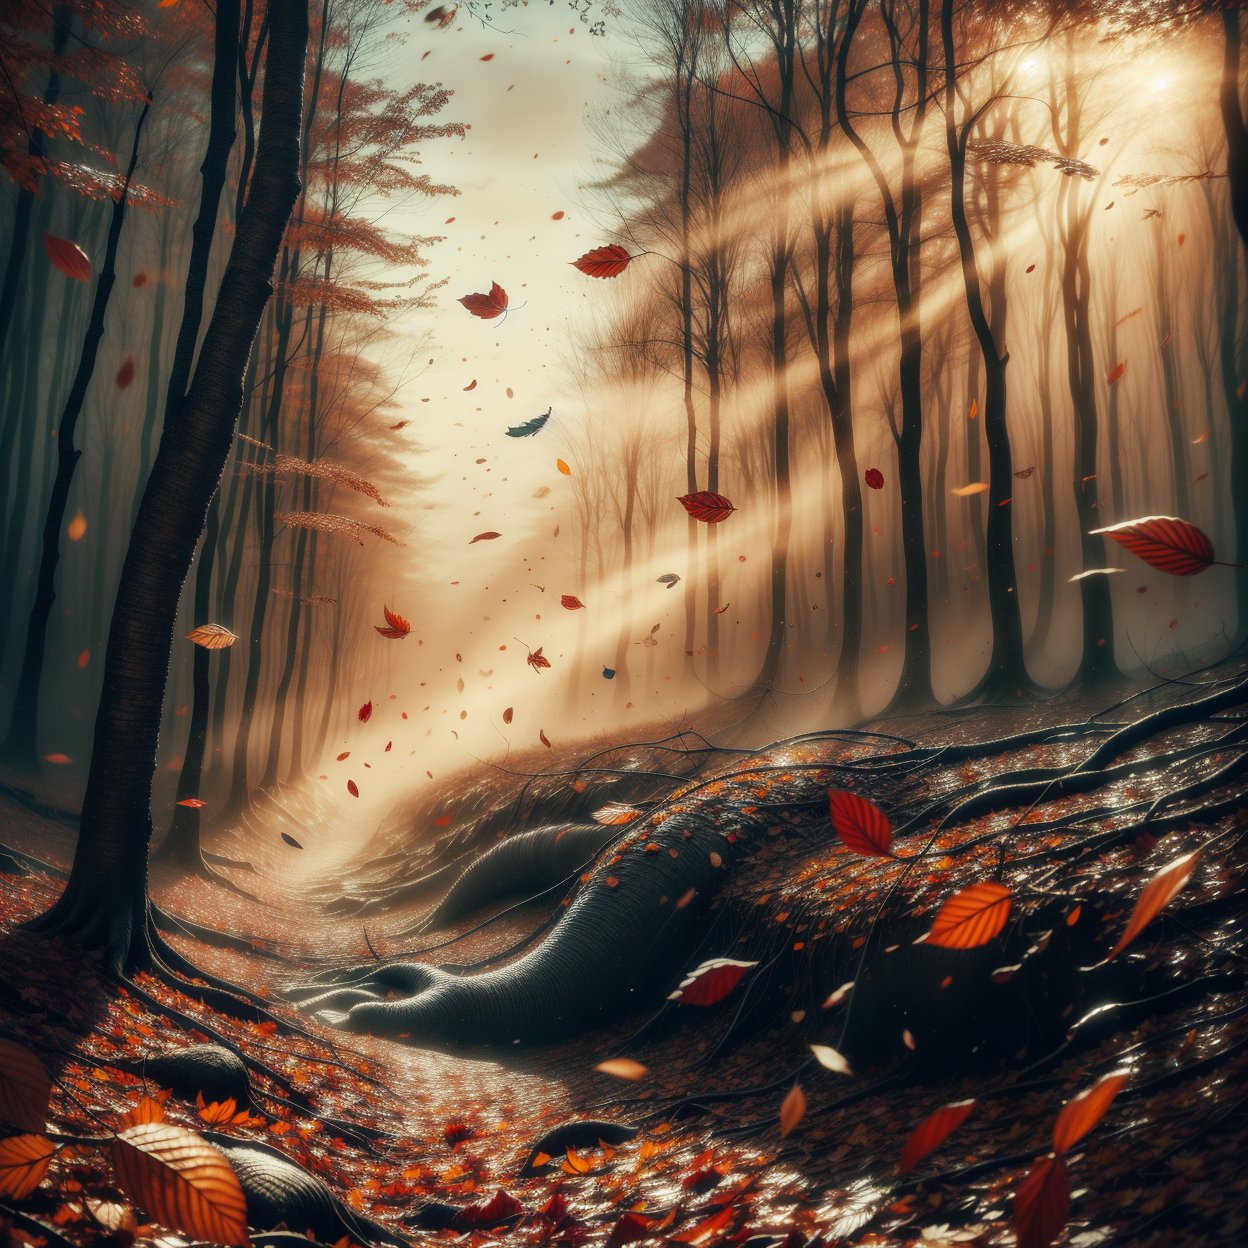 realistic image, vintage style picture, full body, 1man, dinamic_pose, handsome guy walking in forest, autumn leaf drop to the ground, seround by mist, gritty, dusty, fantastical, photohyperrealistic, highly detailed, hyper realistic, with dramatic polarizing filter, sharp focus, HDR, UHD, 64K, 16mm, color graded portra 400 film, remarkable color, ultra realistic,,ABMautumnleaf,Extremely Realistic